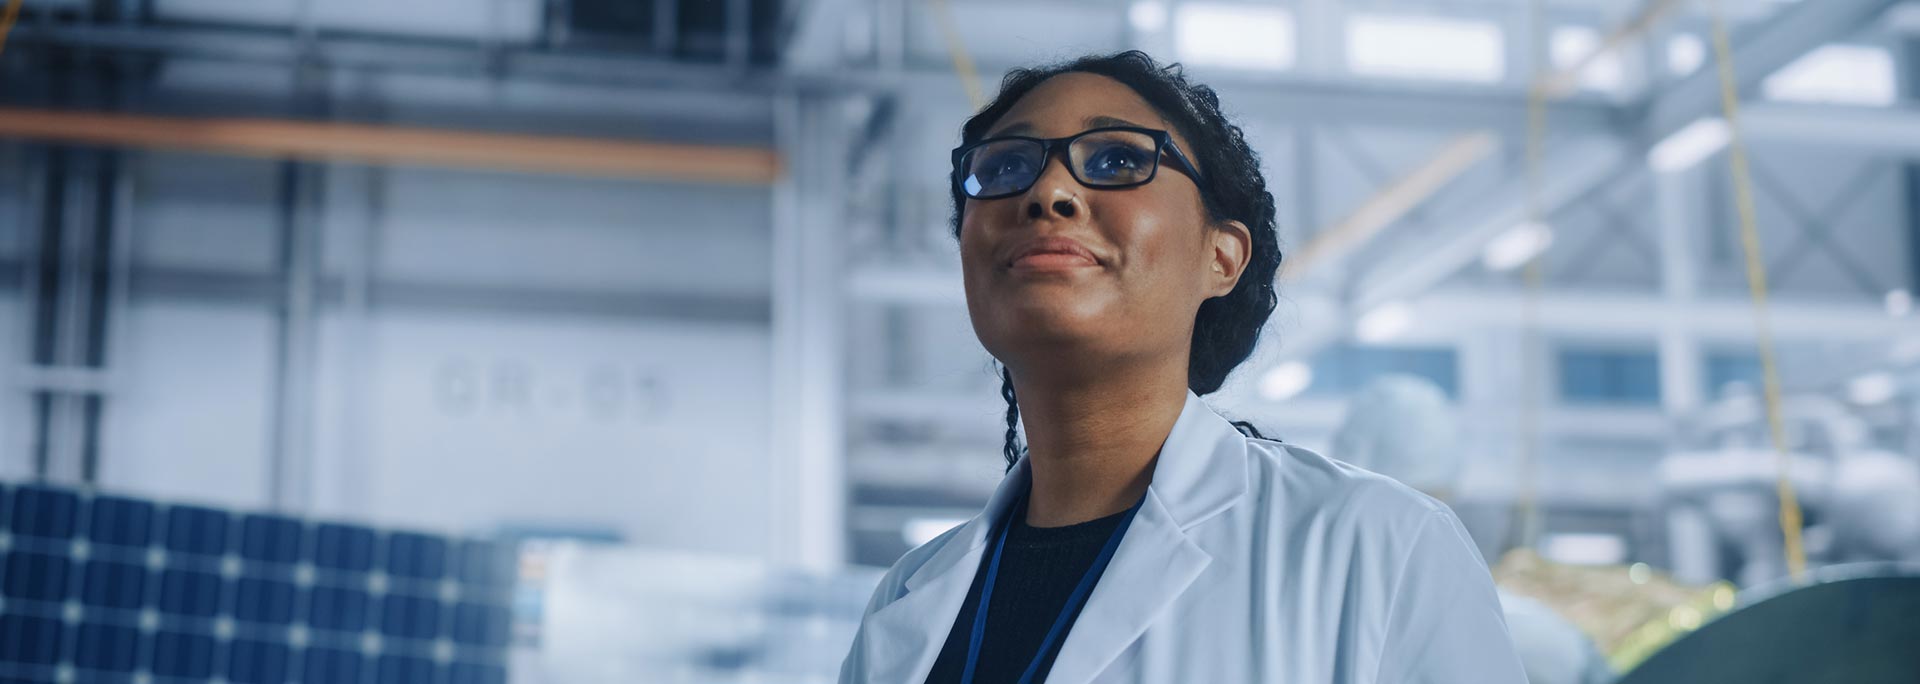 Black woman wearing glasses and a white lab coat inside a factory.